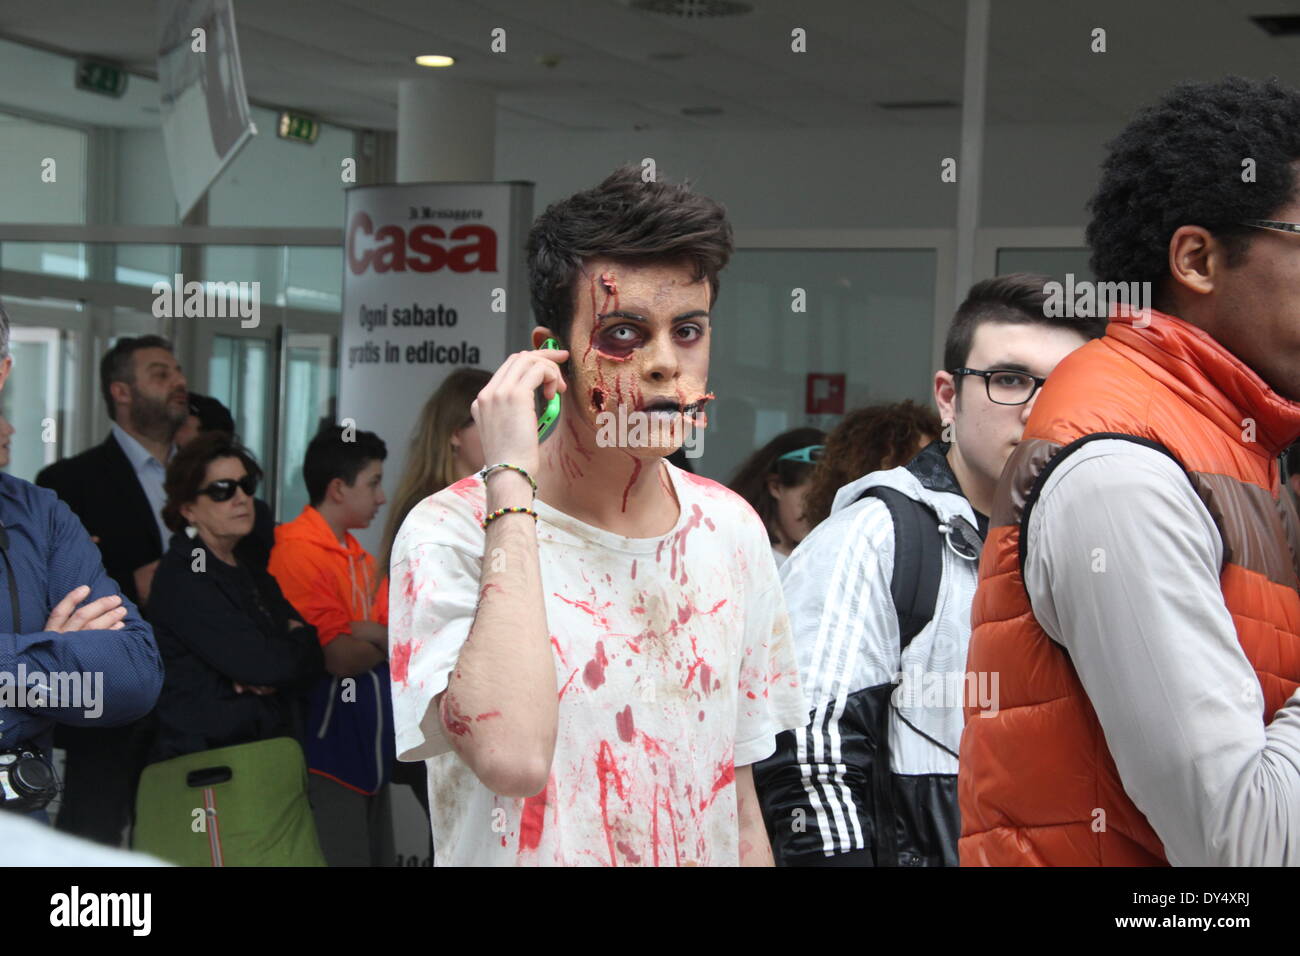 Rome, Italy. 6th April 2014. People dressed as Cosplay characters at the Romics show in Rome. Credit:  Gari Wyn Williams / Alamy Live News Stock Photo